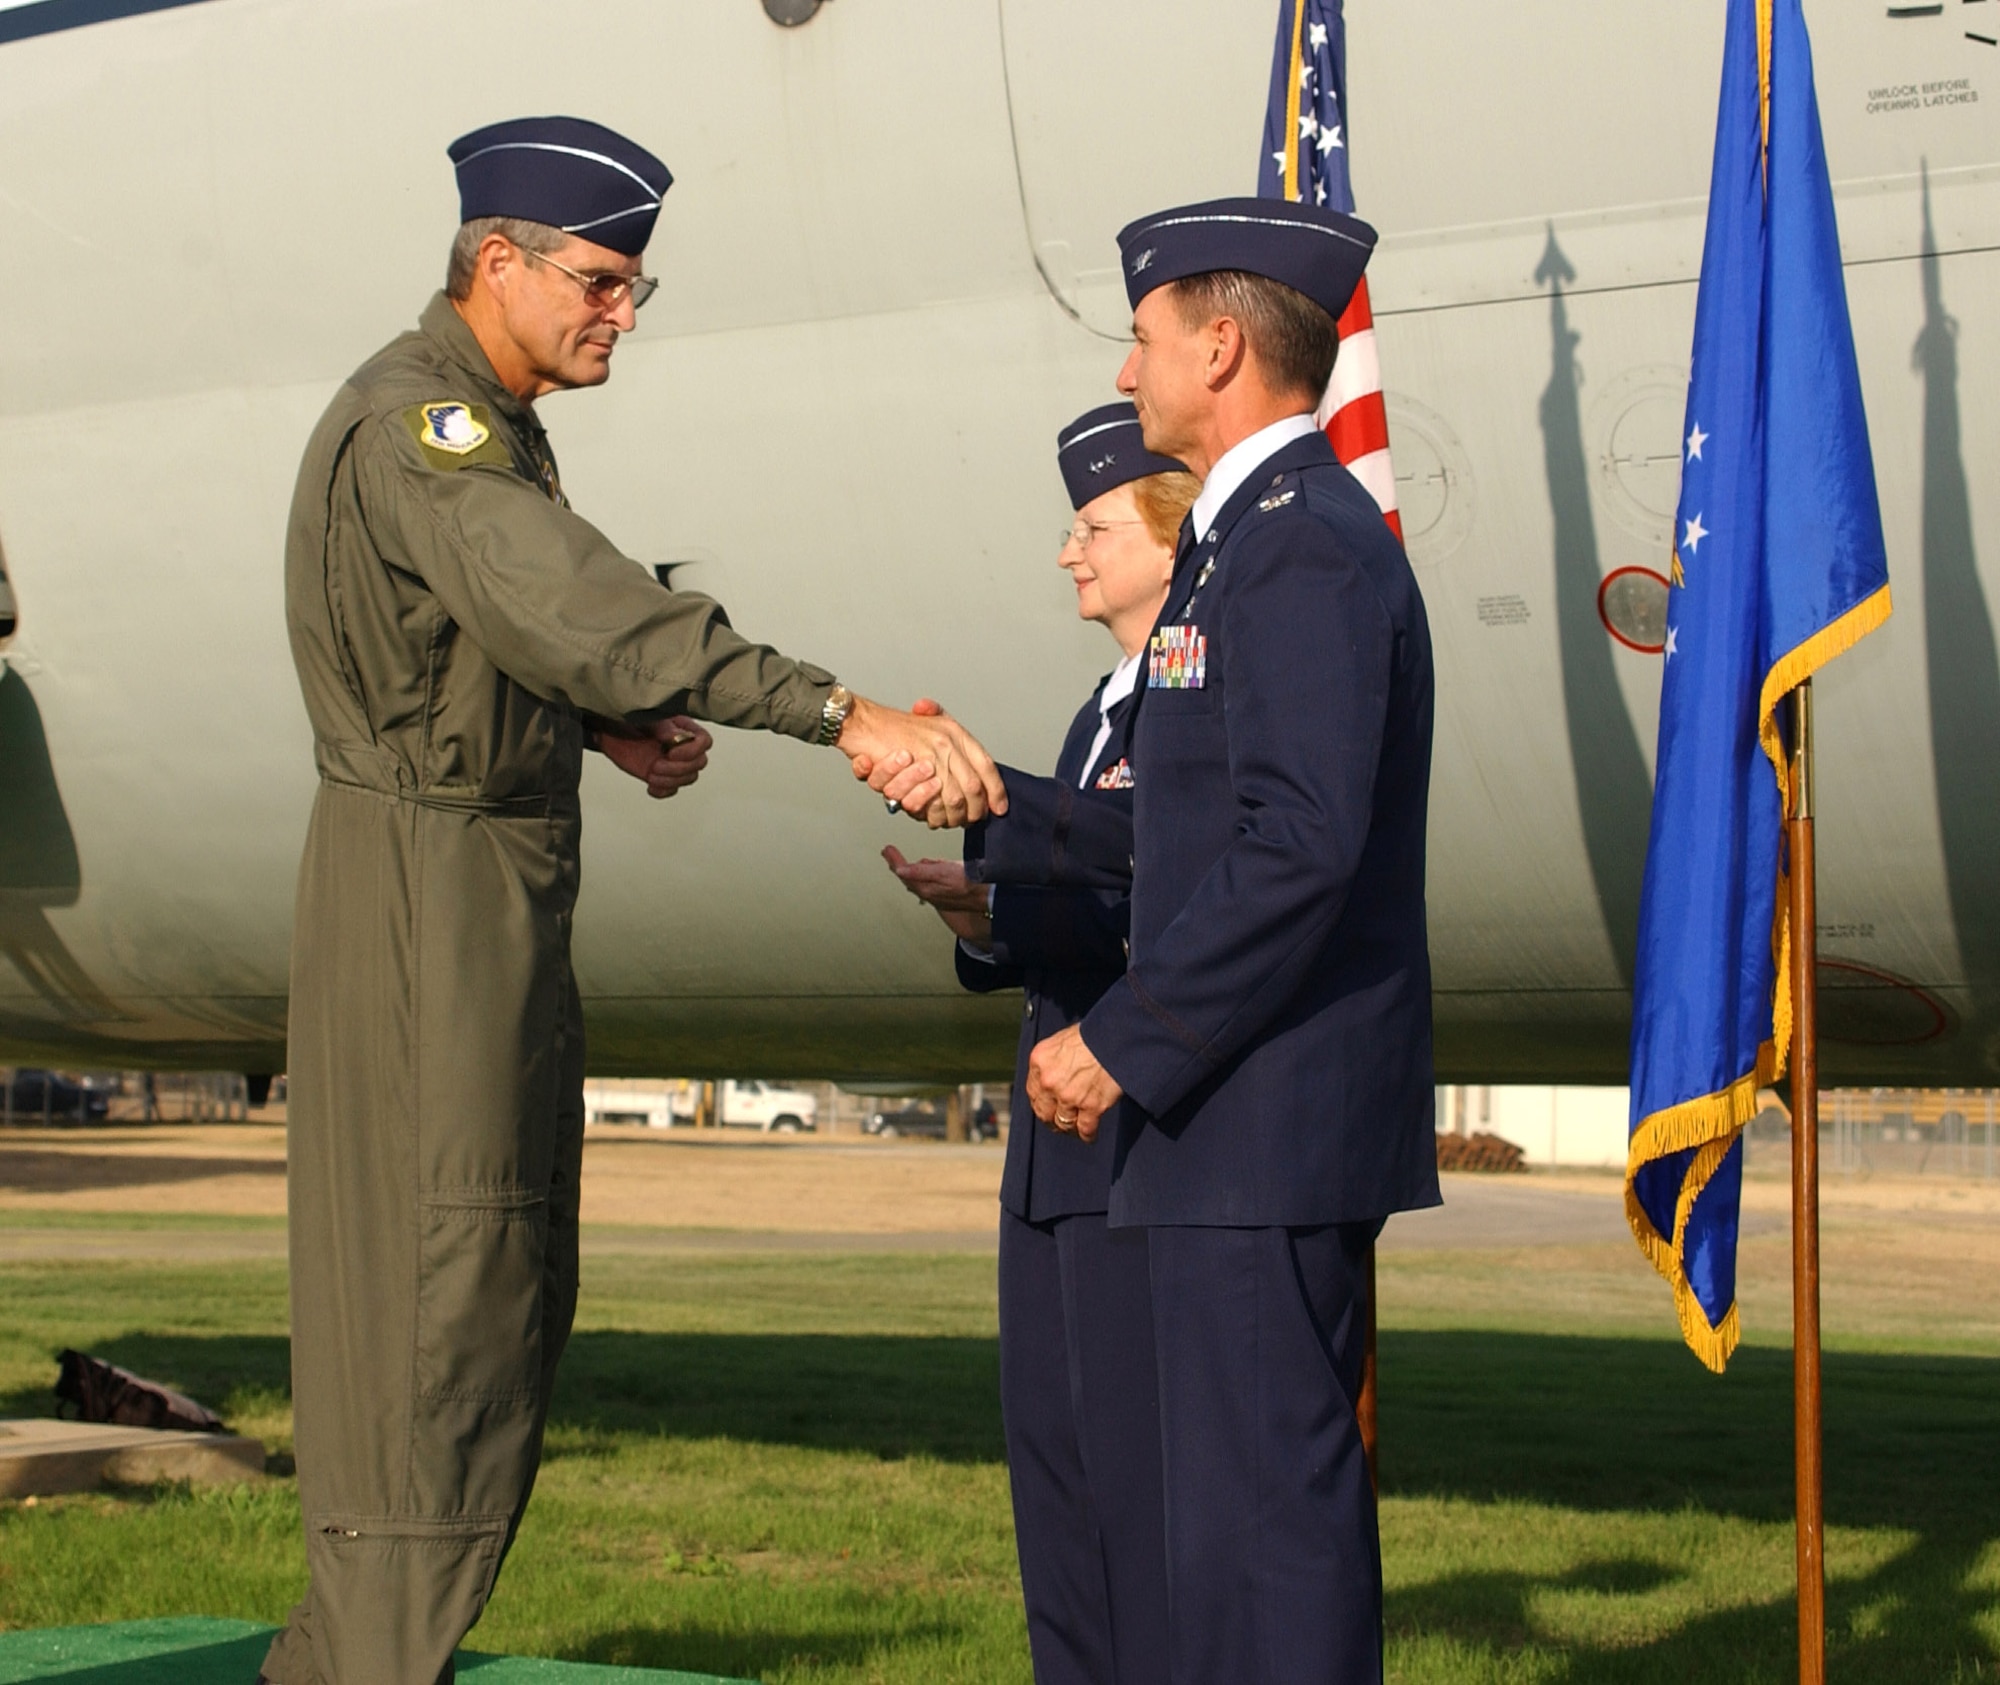 Brig. Gen. David Young, 59th Medical Wing commander, presents wing coins to Maj. Gen. Melissa Rank, assistant Air Force surgeon general for medical force development and nursing services, and Col. (Dr.) Byron Hepburn, command surgeon for Headquarters Air Mobility Command, during the C-9 dedication ceremony at Lackland Air Force Base, Texas, Aug. 31. (U.S. Air Force photo/Master Sgt. Kimberly Yearyean-Siers)
 
